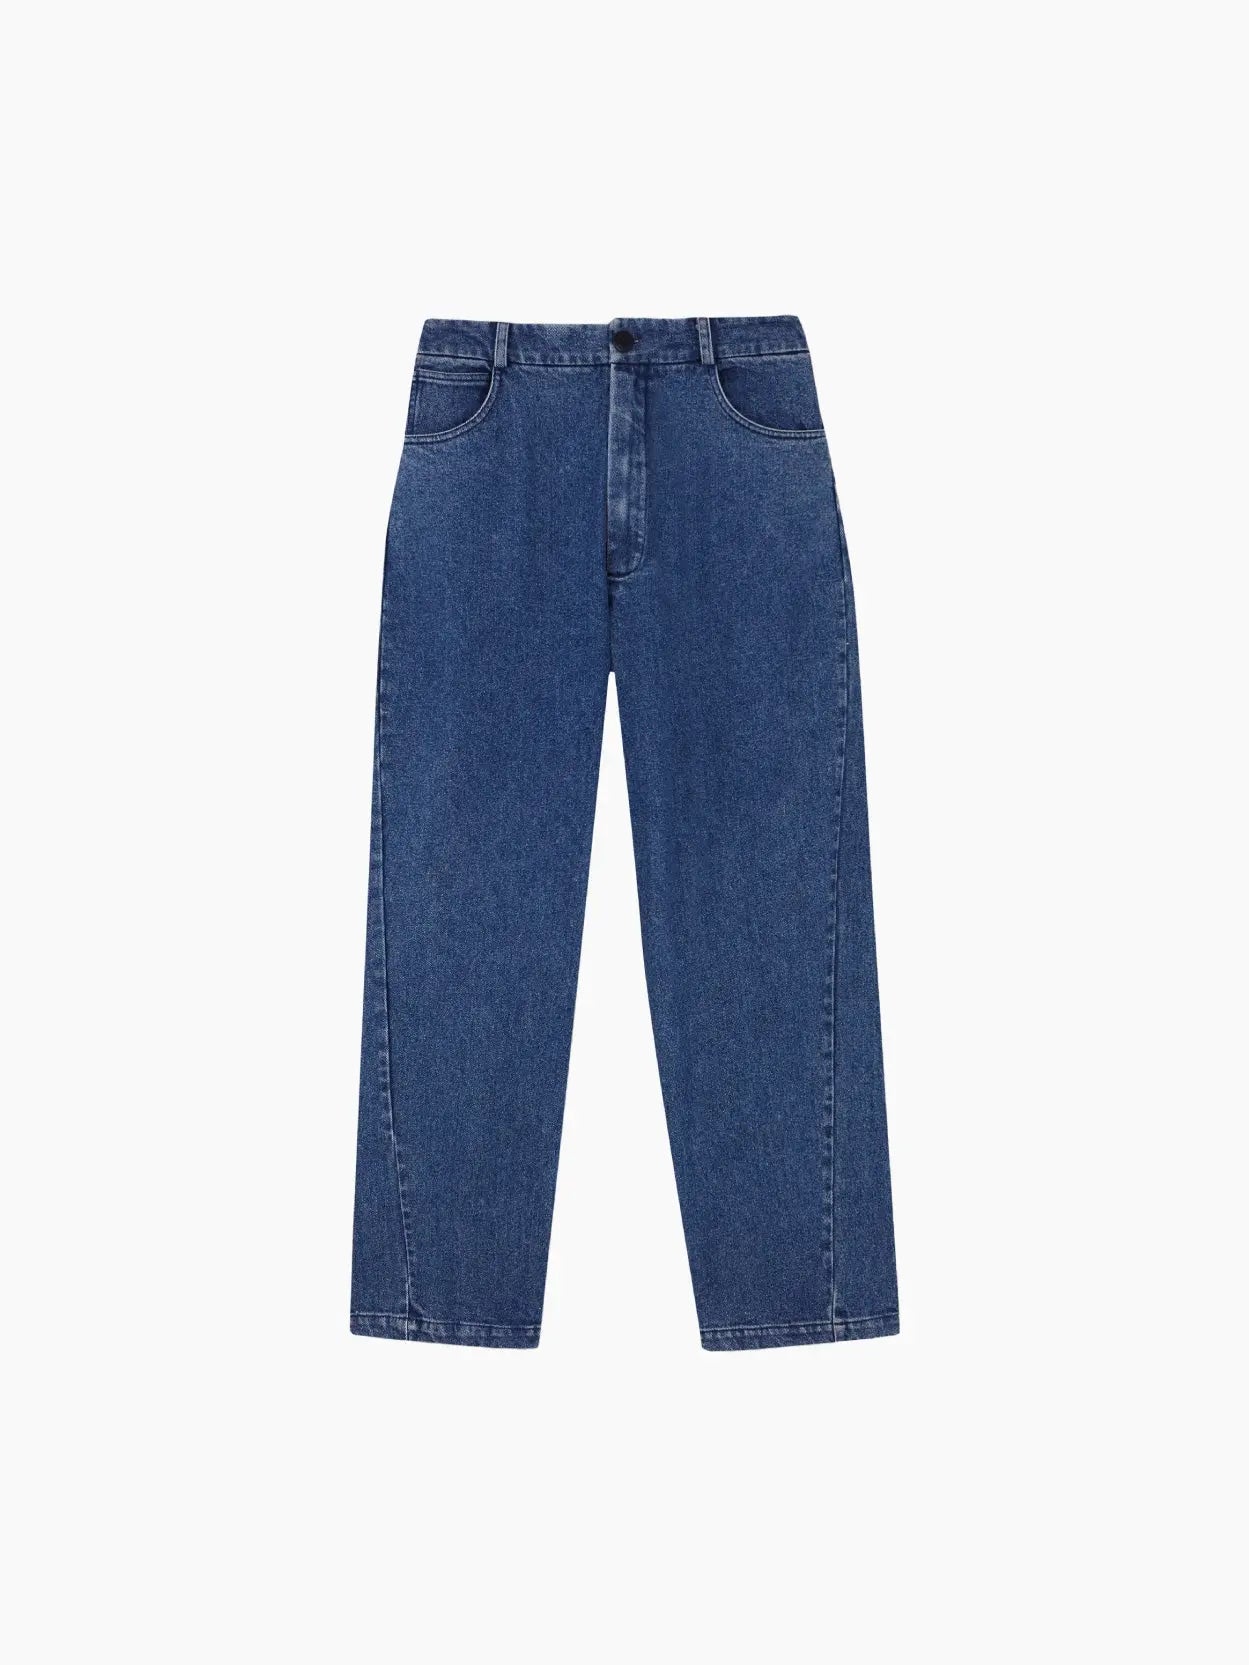 A pair of Straight Denim Pants Indigo with a high waist and straight-leg cut, available at Bassalstore in Barcelona. The Cordera pants feature a button and zipper closure, front pockets, and a simple design with no visible embellishments or distressing.